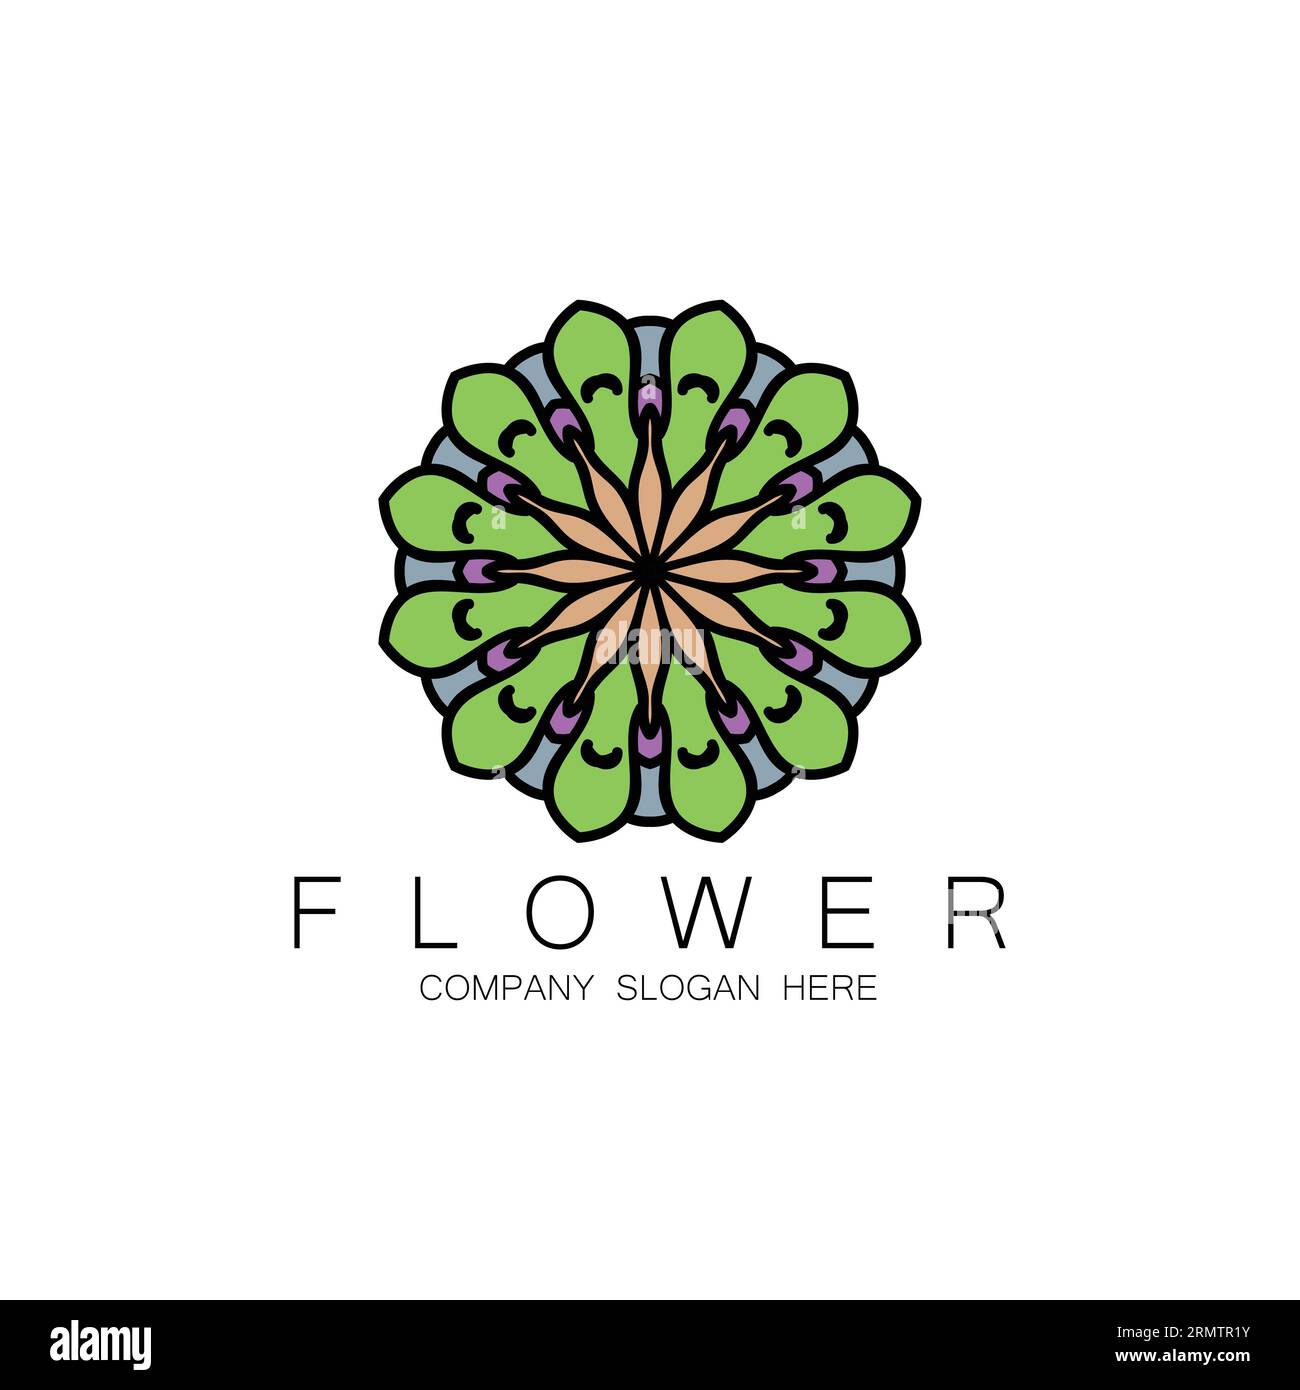 Floral Brands and Logo Designs. Stock Vector - Illustration of